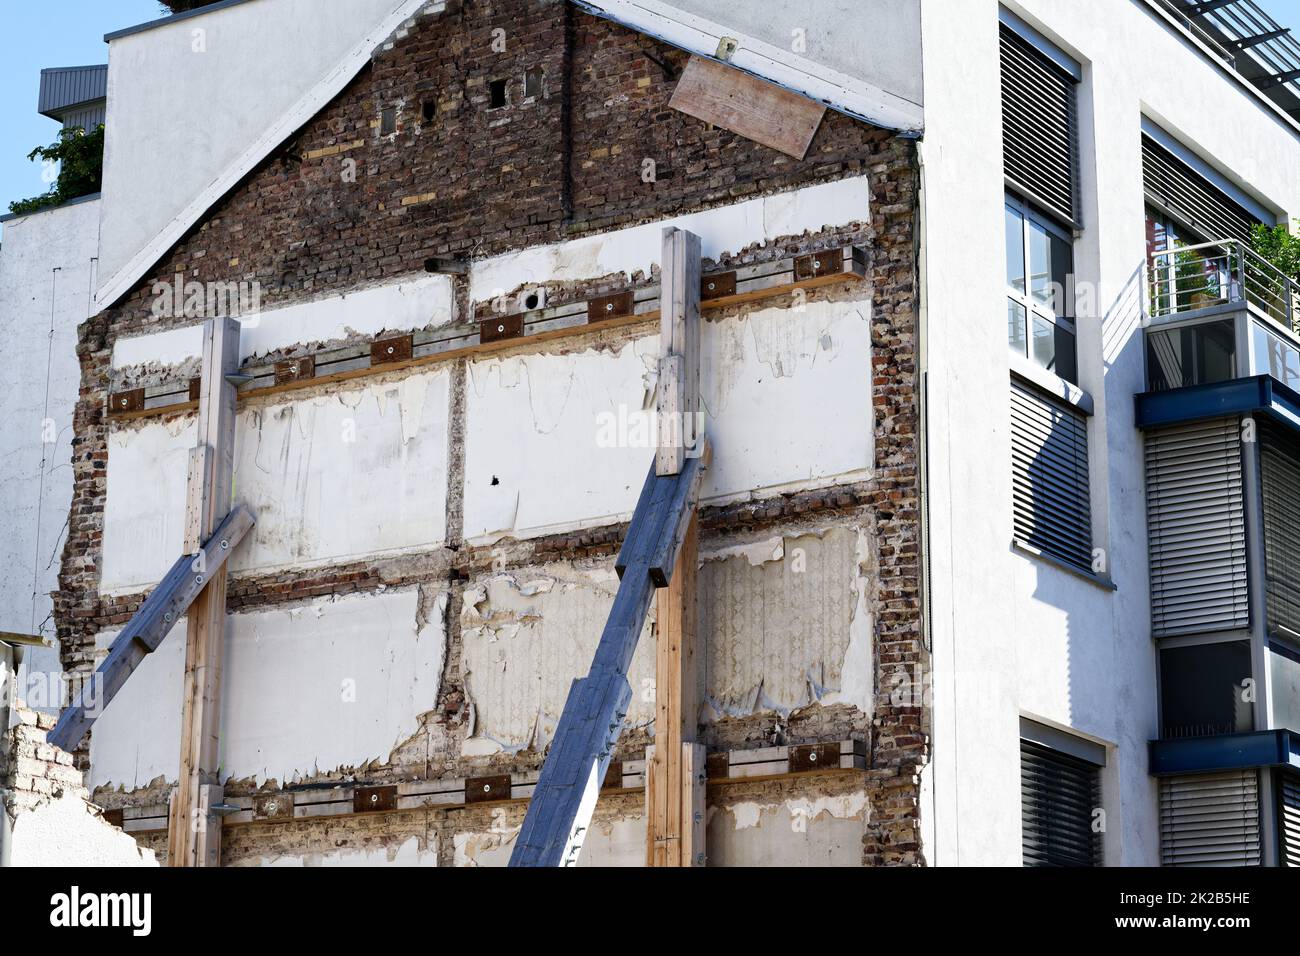 Support of a building wall with wooden struts after demolition of an old building Stock Photo